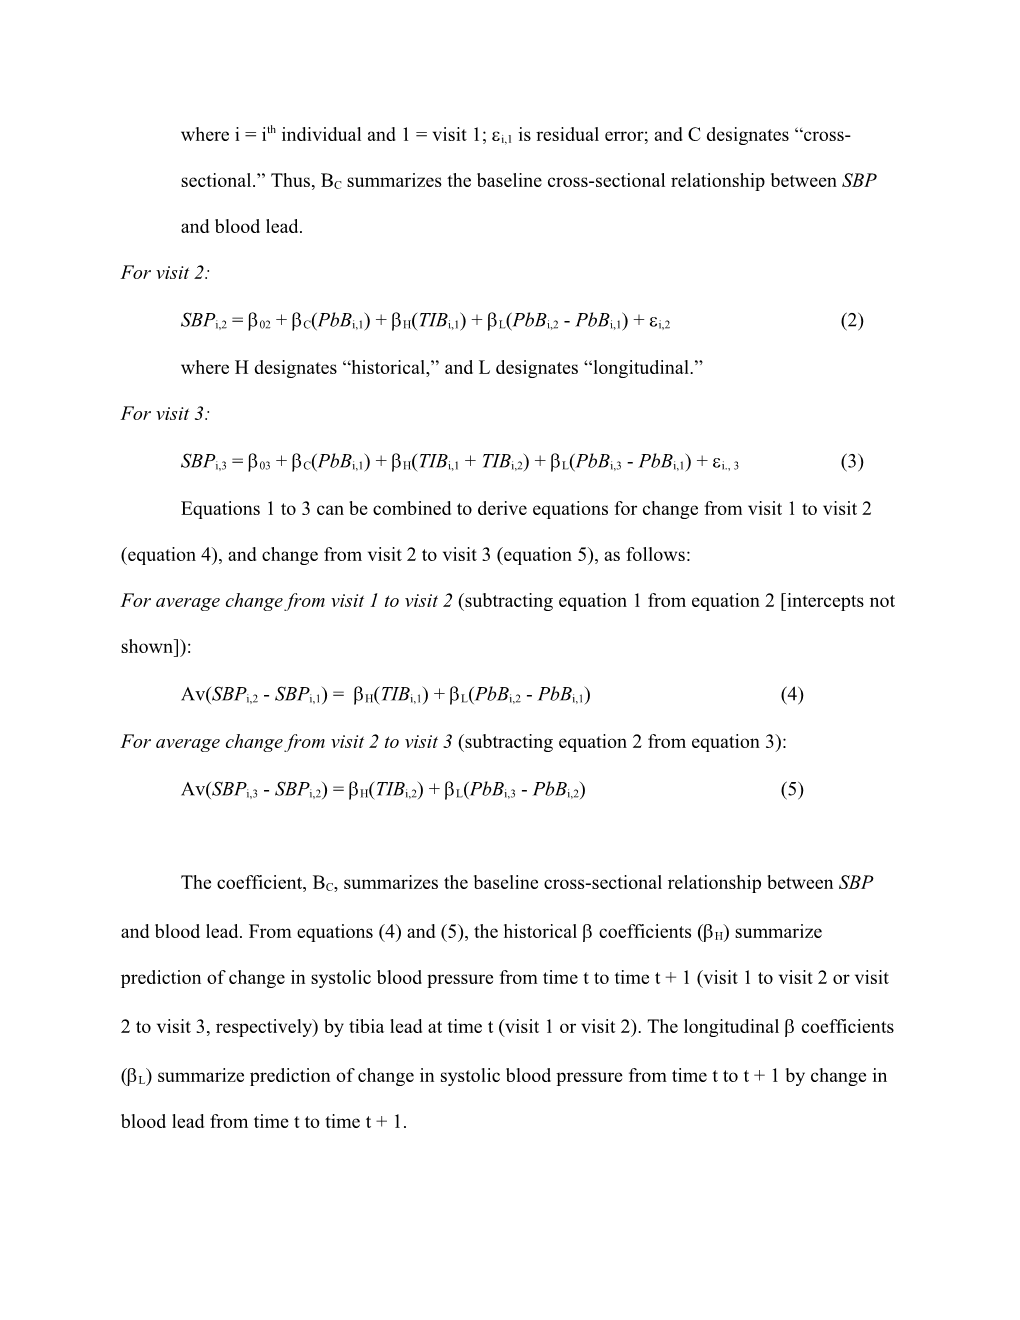 This Appendix Contains a Complete Description of the Regression Equations Corresponding